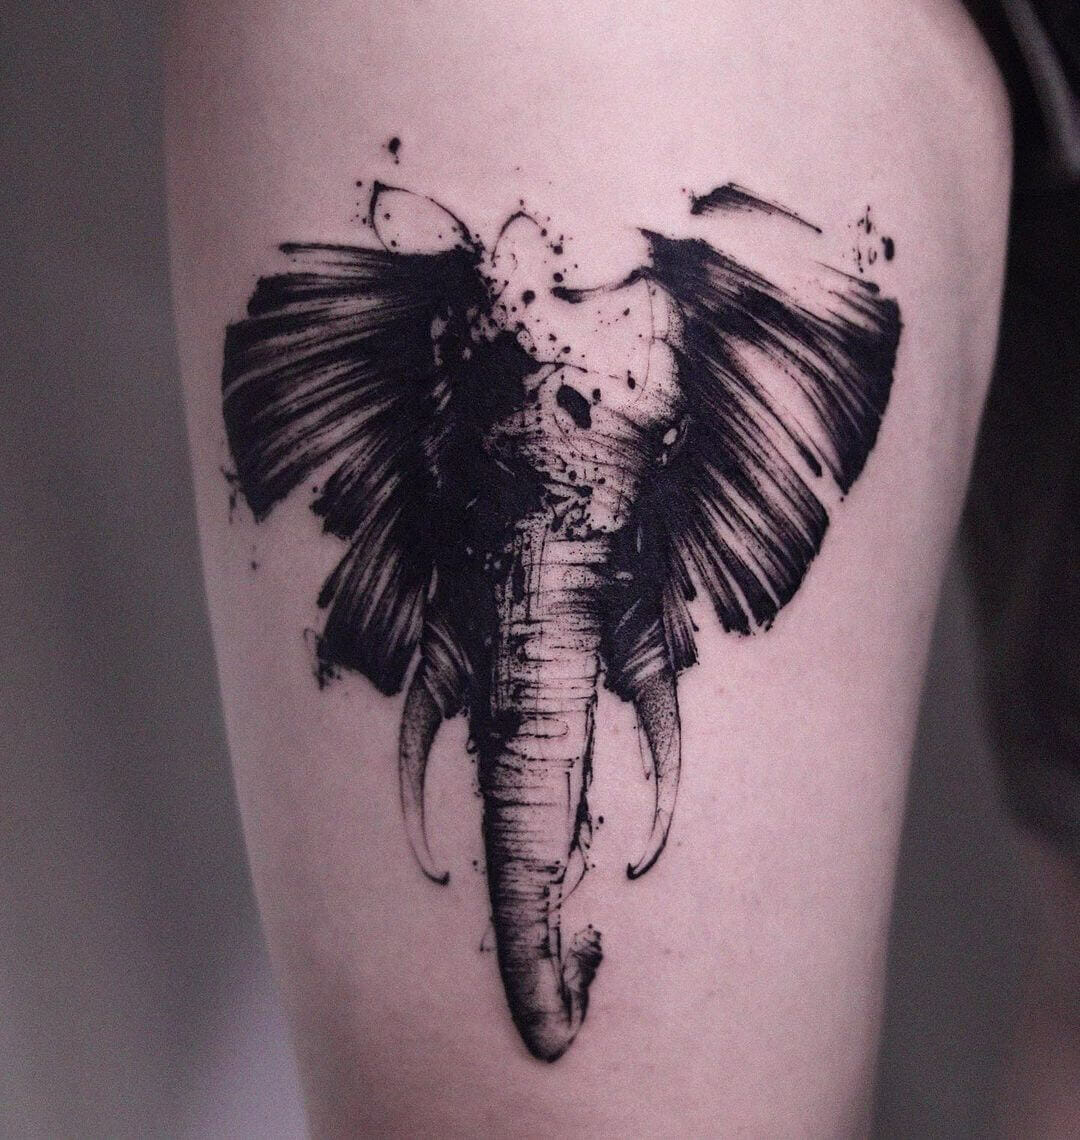 101 Best Sketch Tattoo Ideas You Have To See To Believe!